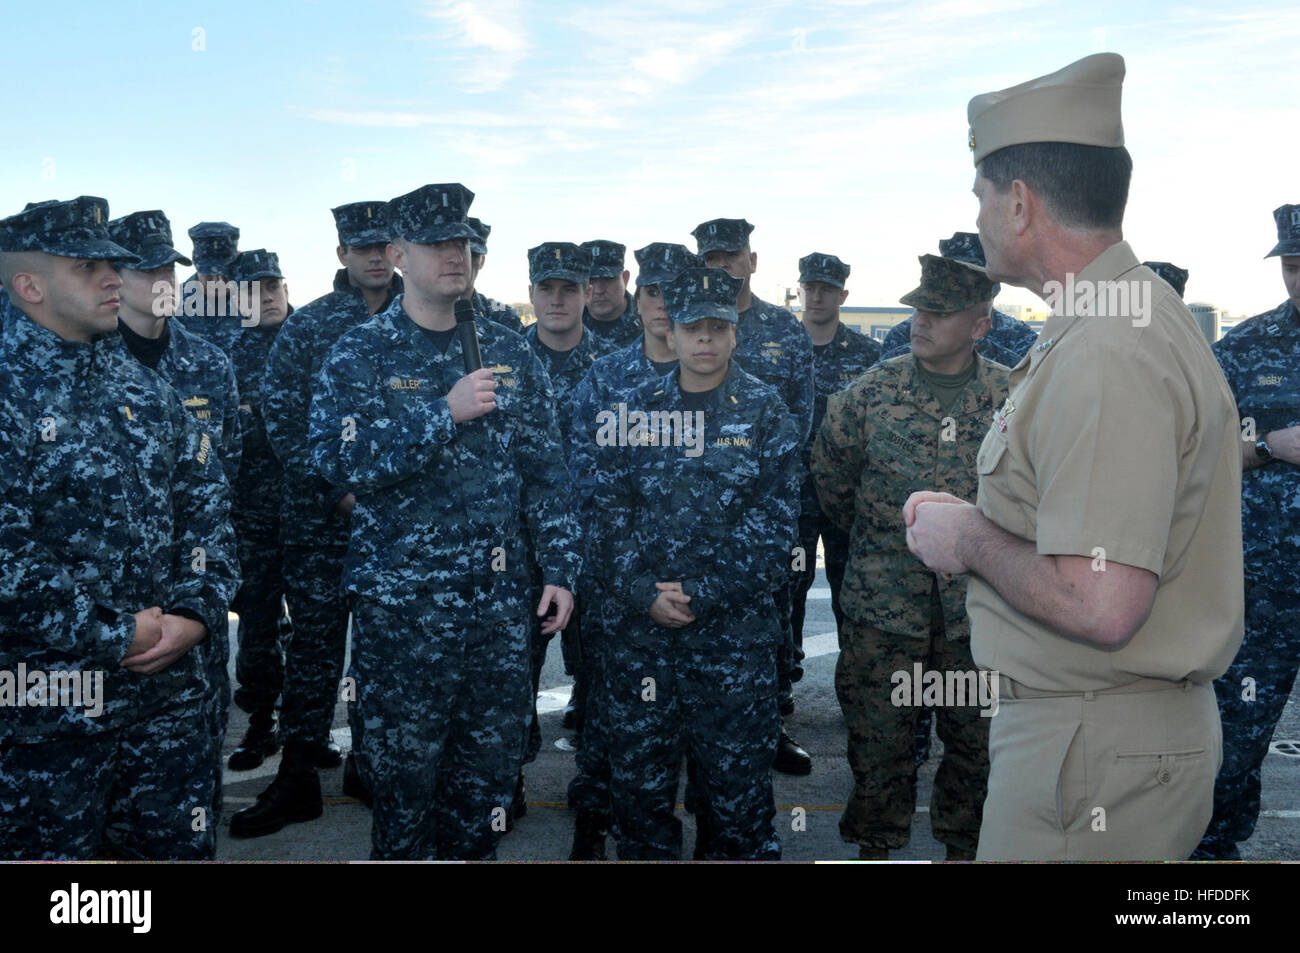 U.S. Navy Vice Adm. Bill Moran, foreground right, the chief of naval personnel, listens to a question from Lt. j.g. Daniel Giller, center left, aboard the amphibious transport dock ship USS New York (LPD 21) at Naval Station Mayport, Fla., Jan. 17, 2014. The naval station was the New York?s new home port after the ship was reassigned from Naval Station Norfolk, Va., as part of a larger move of the Iwo Jima Amphibious Ready Group. (U.S. Navy photo by Mass Communication Specialist 3rd Class Angus Beckles/Released) U.S. Navy Vice Adm. Bill Moran, foreground right, the chief of naval personnel, li Stock Photo